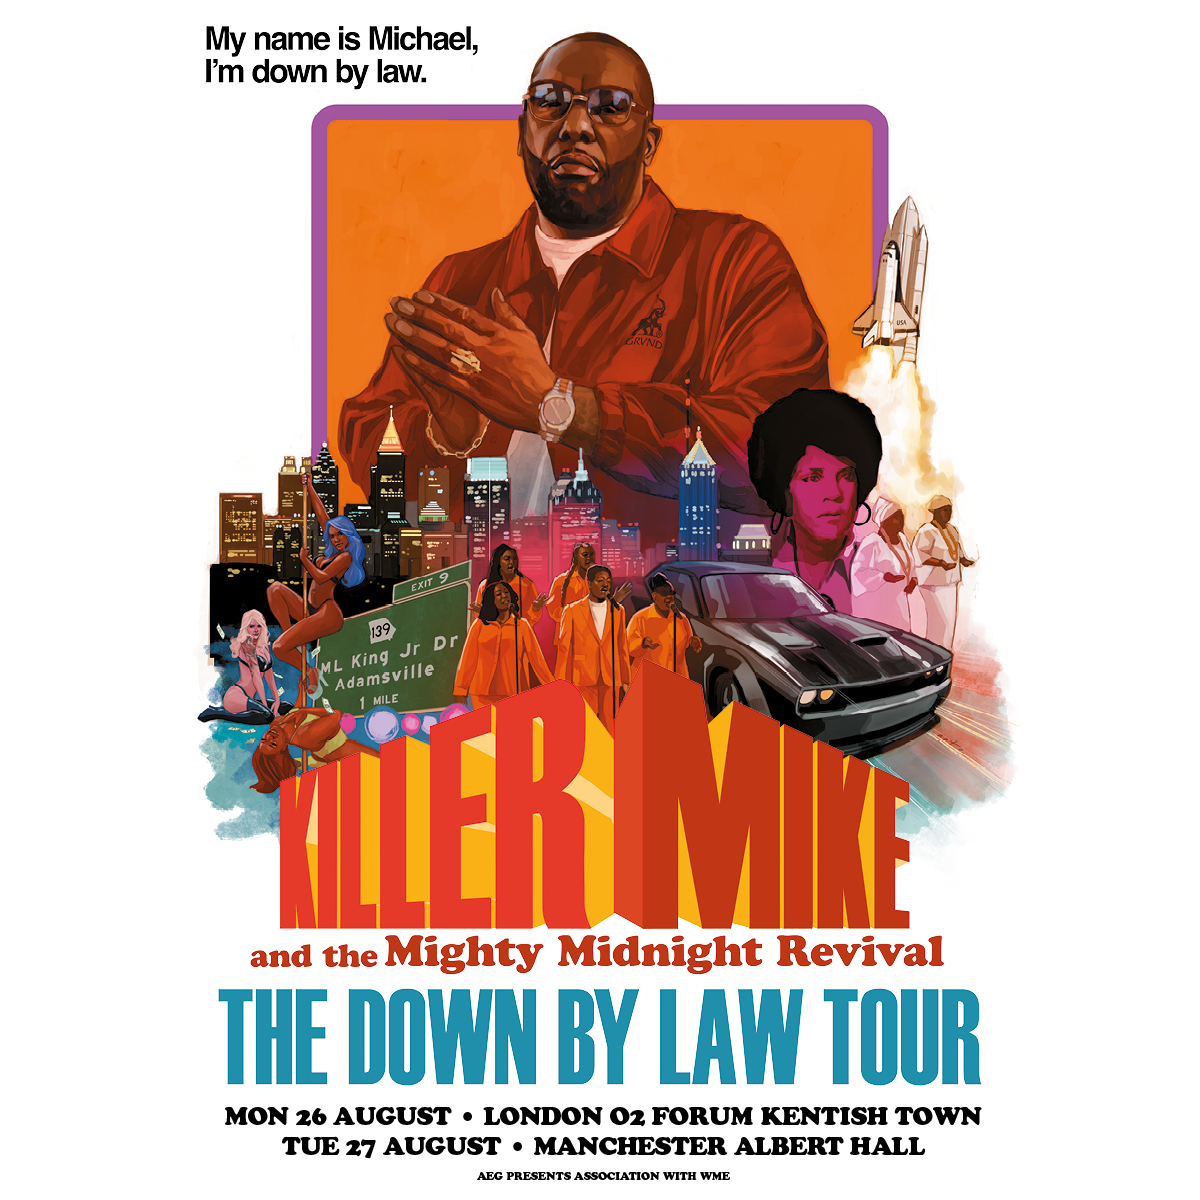 🎤🔥 @KillerMike is taking over the stage, delivering raw & powerful performances with the #DownByLaw Tour! Stops at @O2ForumKTown & @Alberthallmcr, don't miss his unmatched energy & thought-provoking lyrics! ⏰ Tickets are on sale now 🎫 w.axs.com/3P6050QKAml